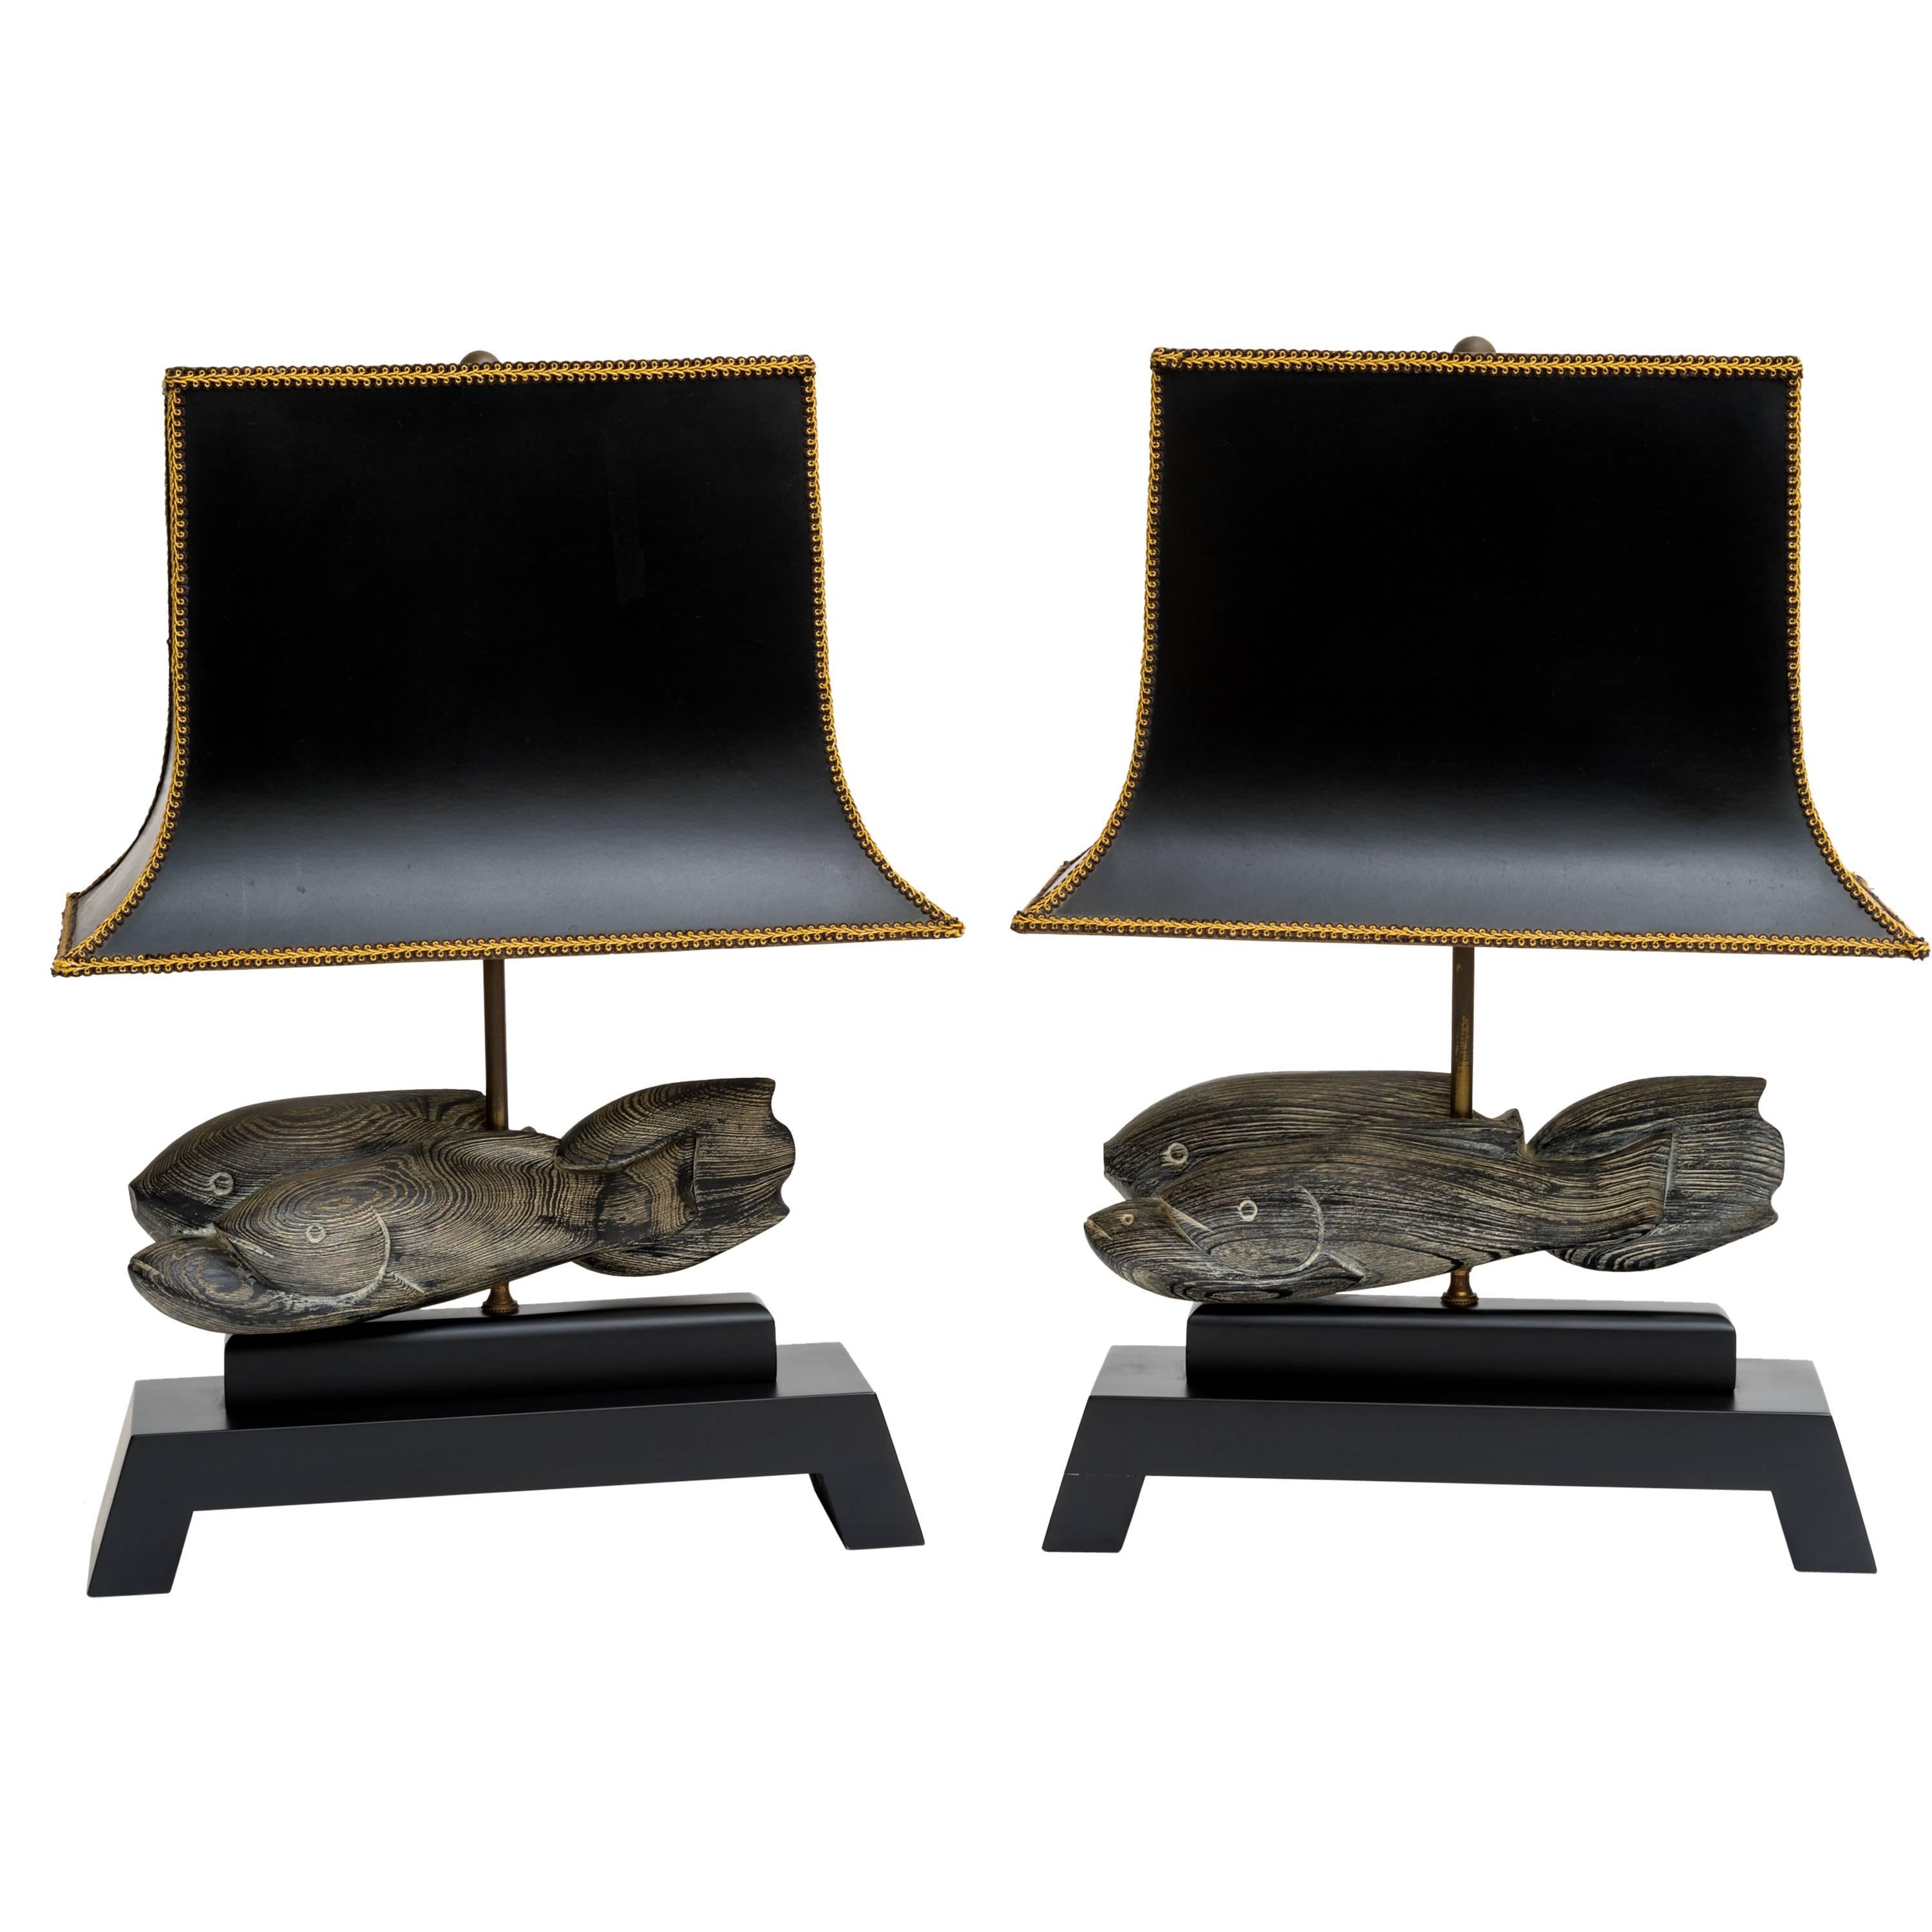 Cerused Fish Sculpture Lamps with Platform Bases